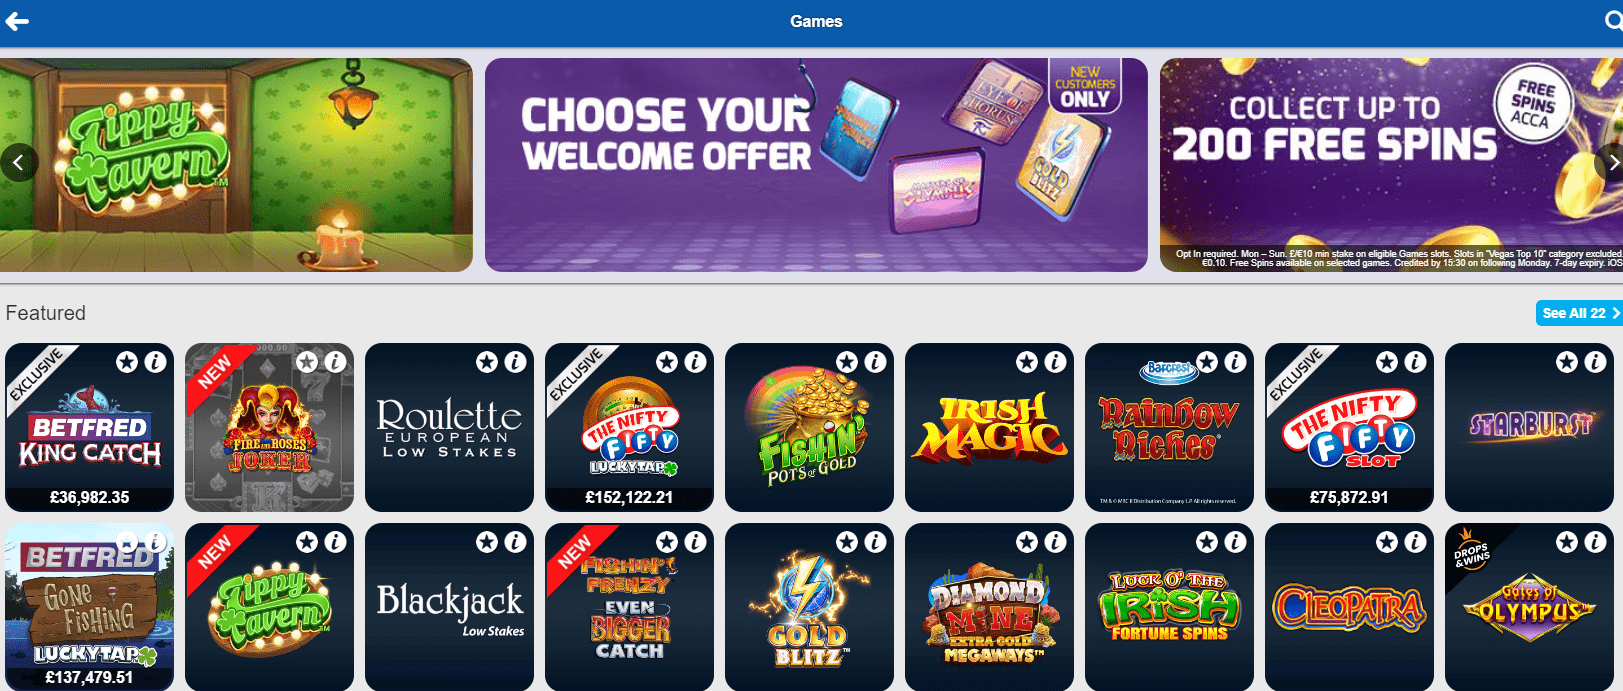 betfred games